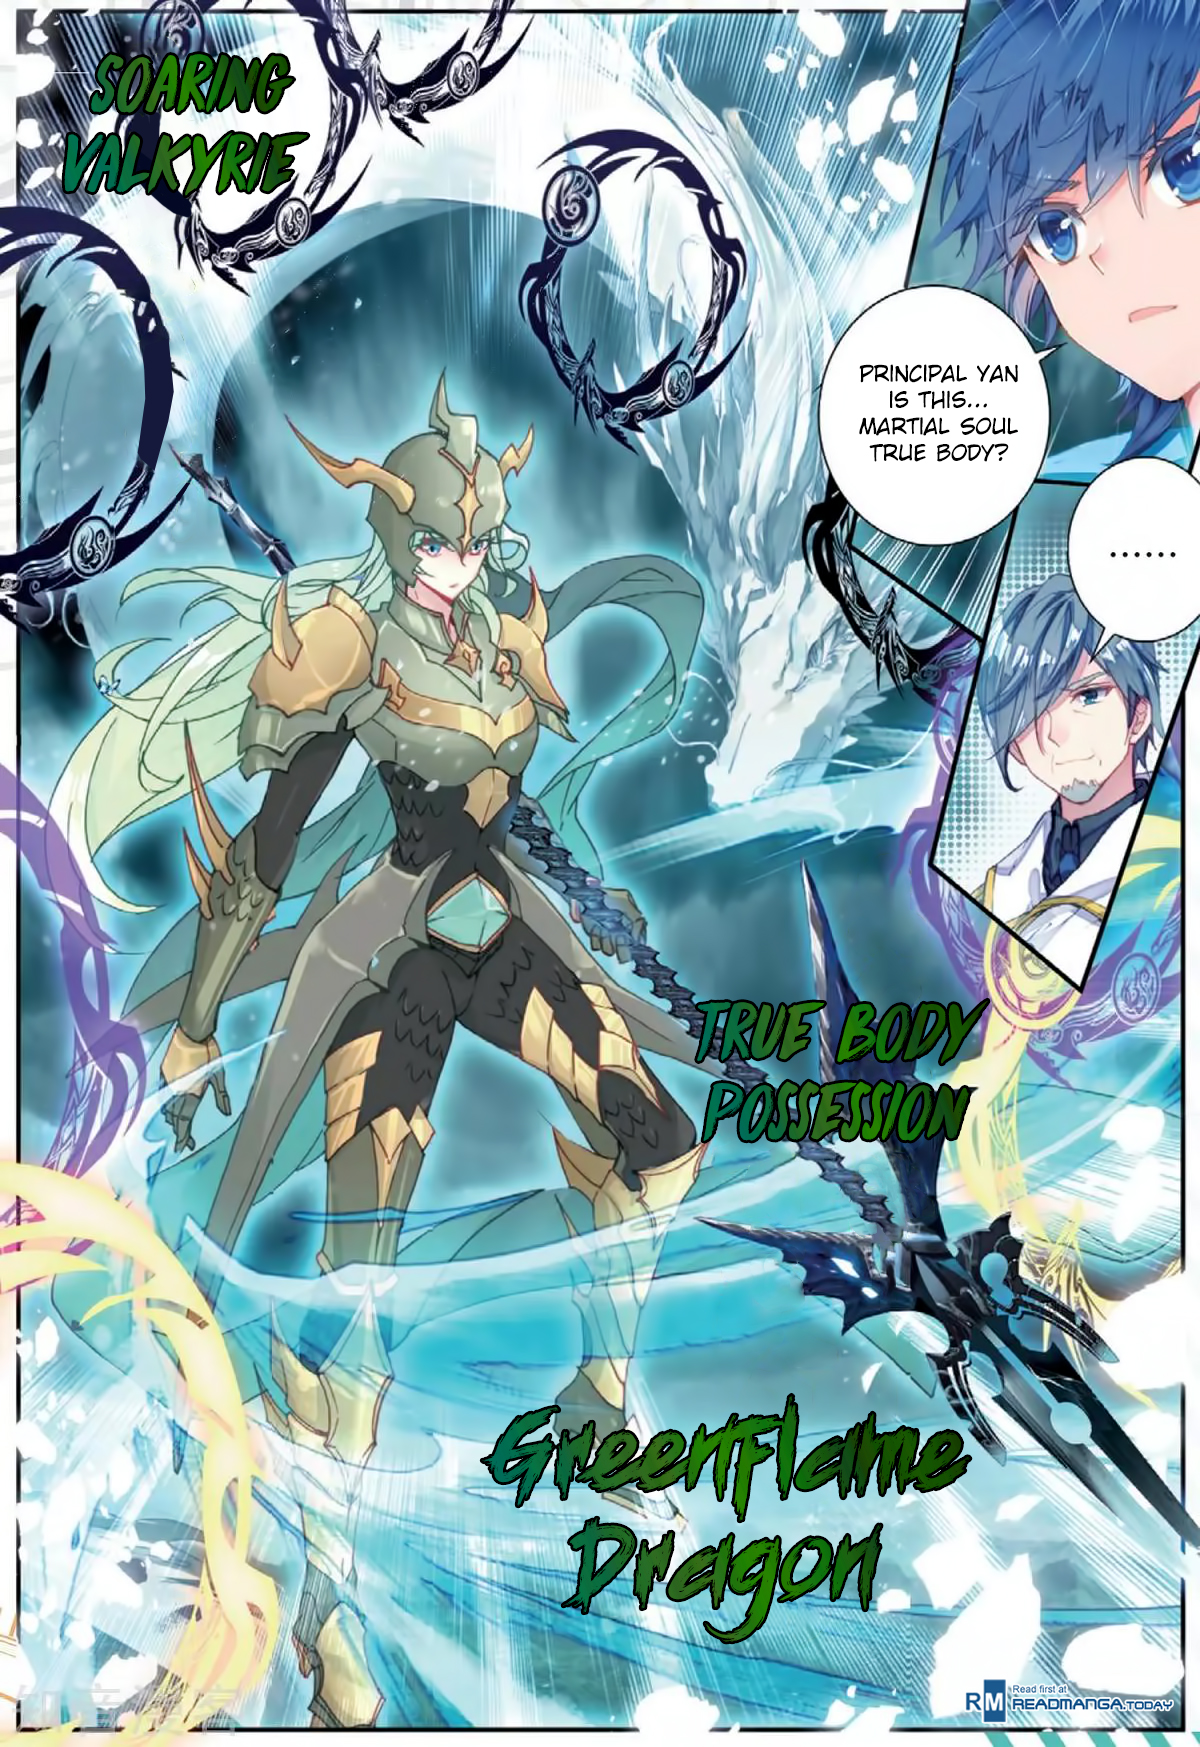 Soul Land II The Peerless Tang Sect Ch. 177 Valkyrie Douluo (1)